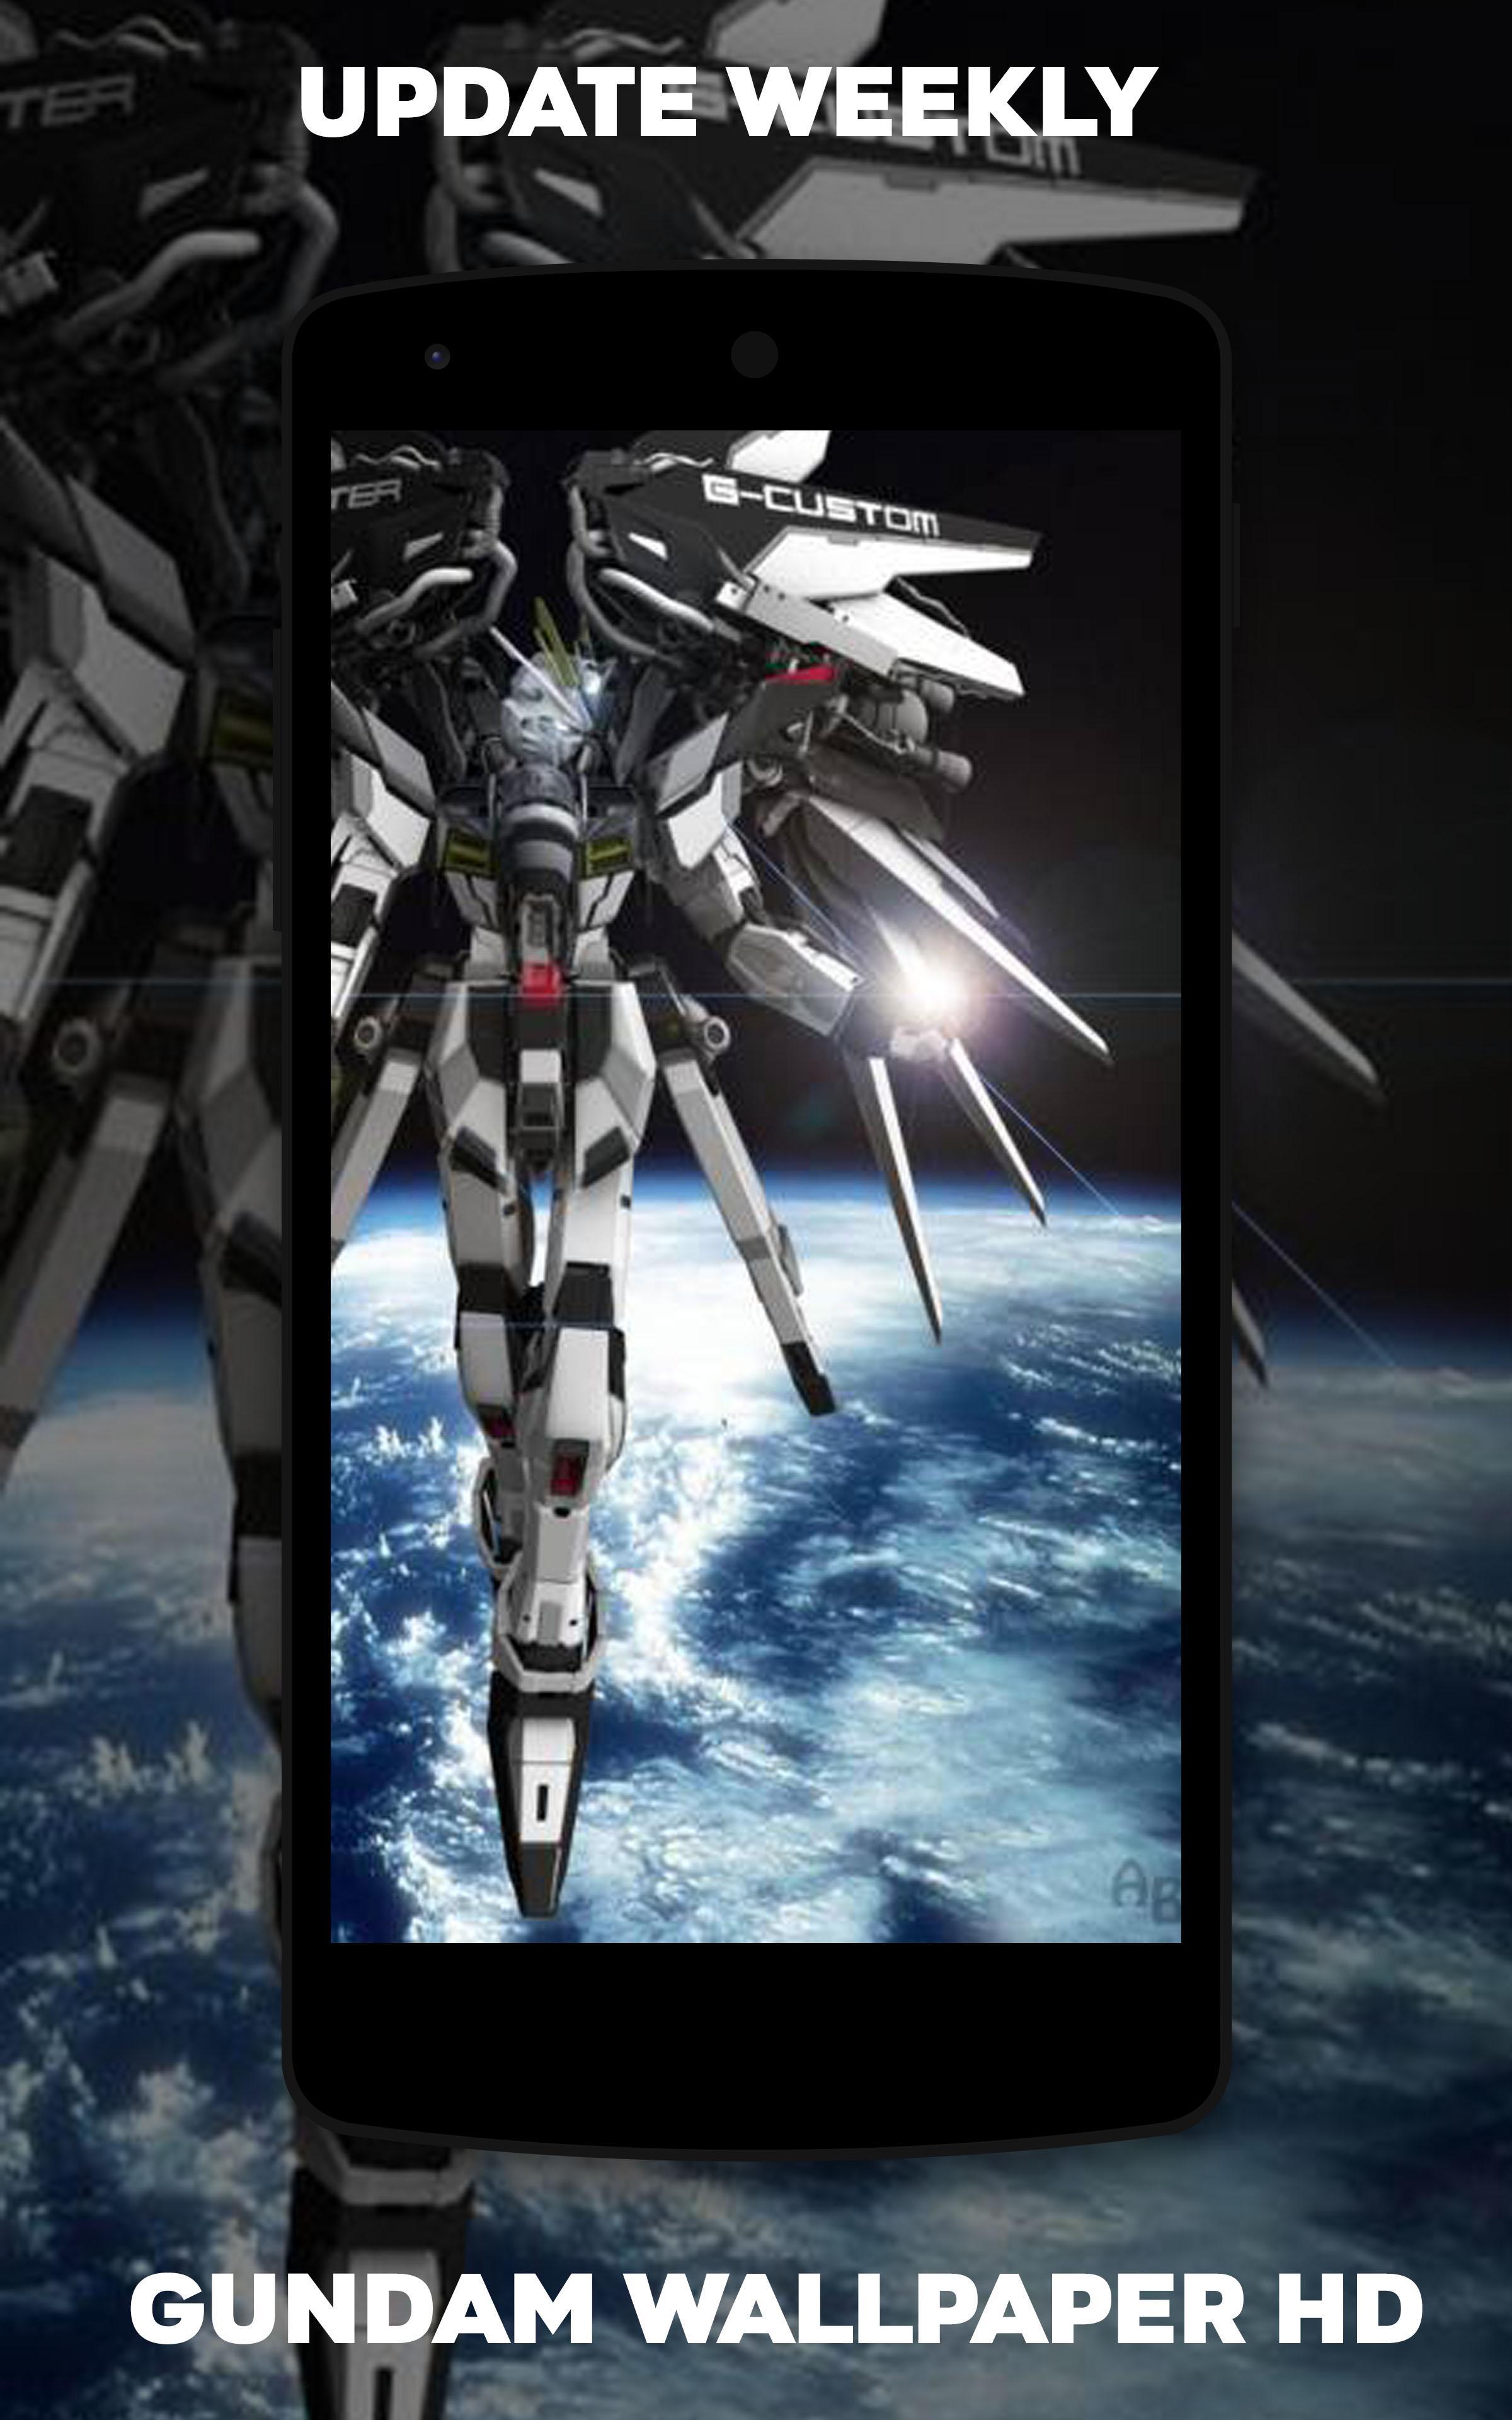 Gundam Wallpaper Hd For Android Apk Download